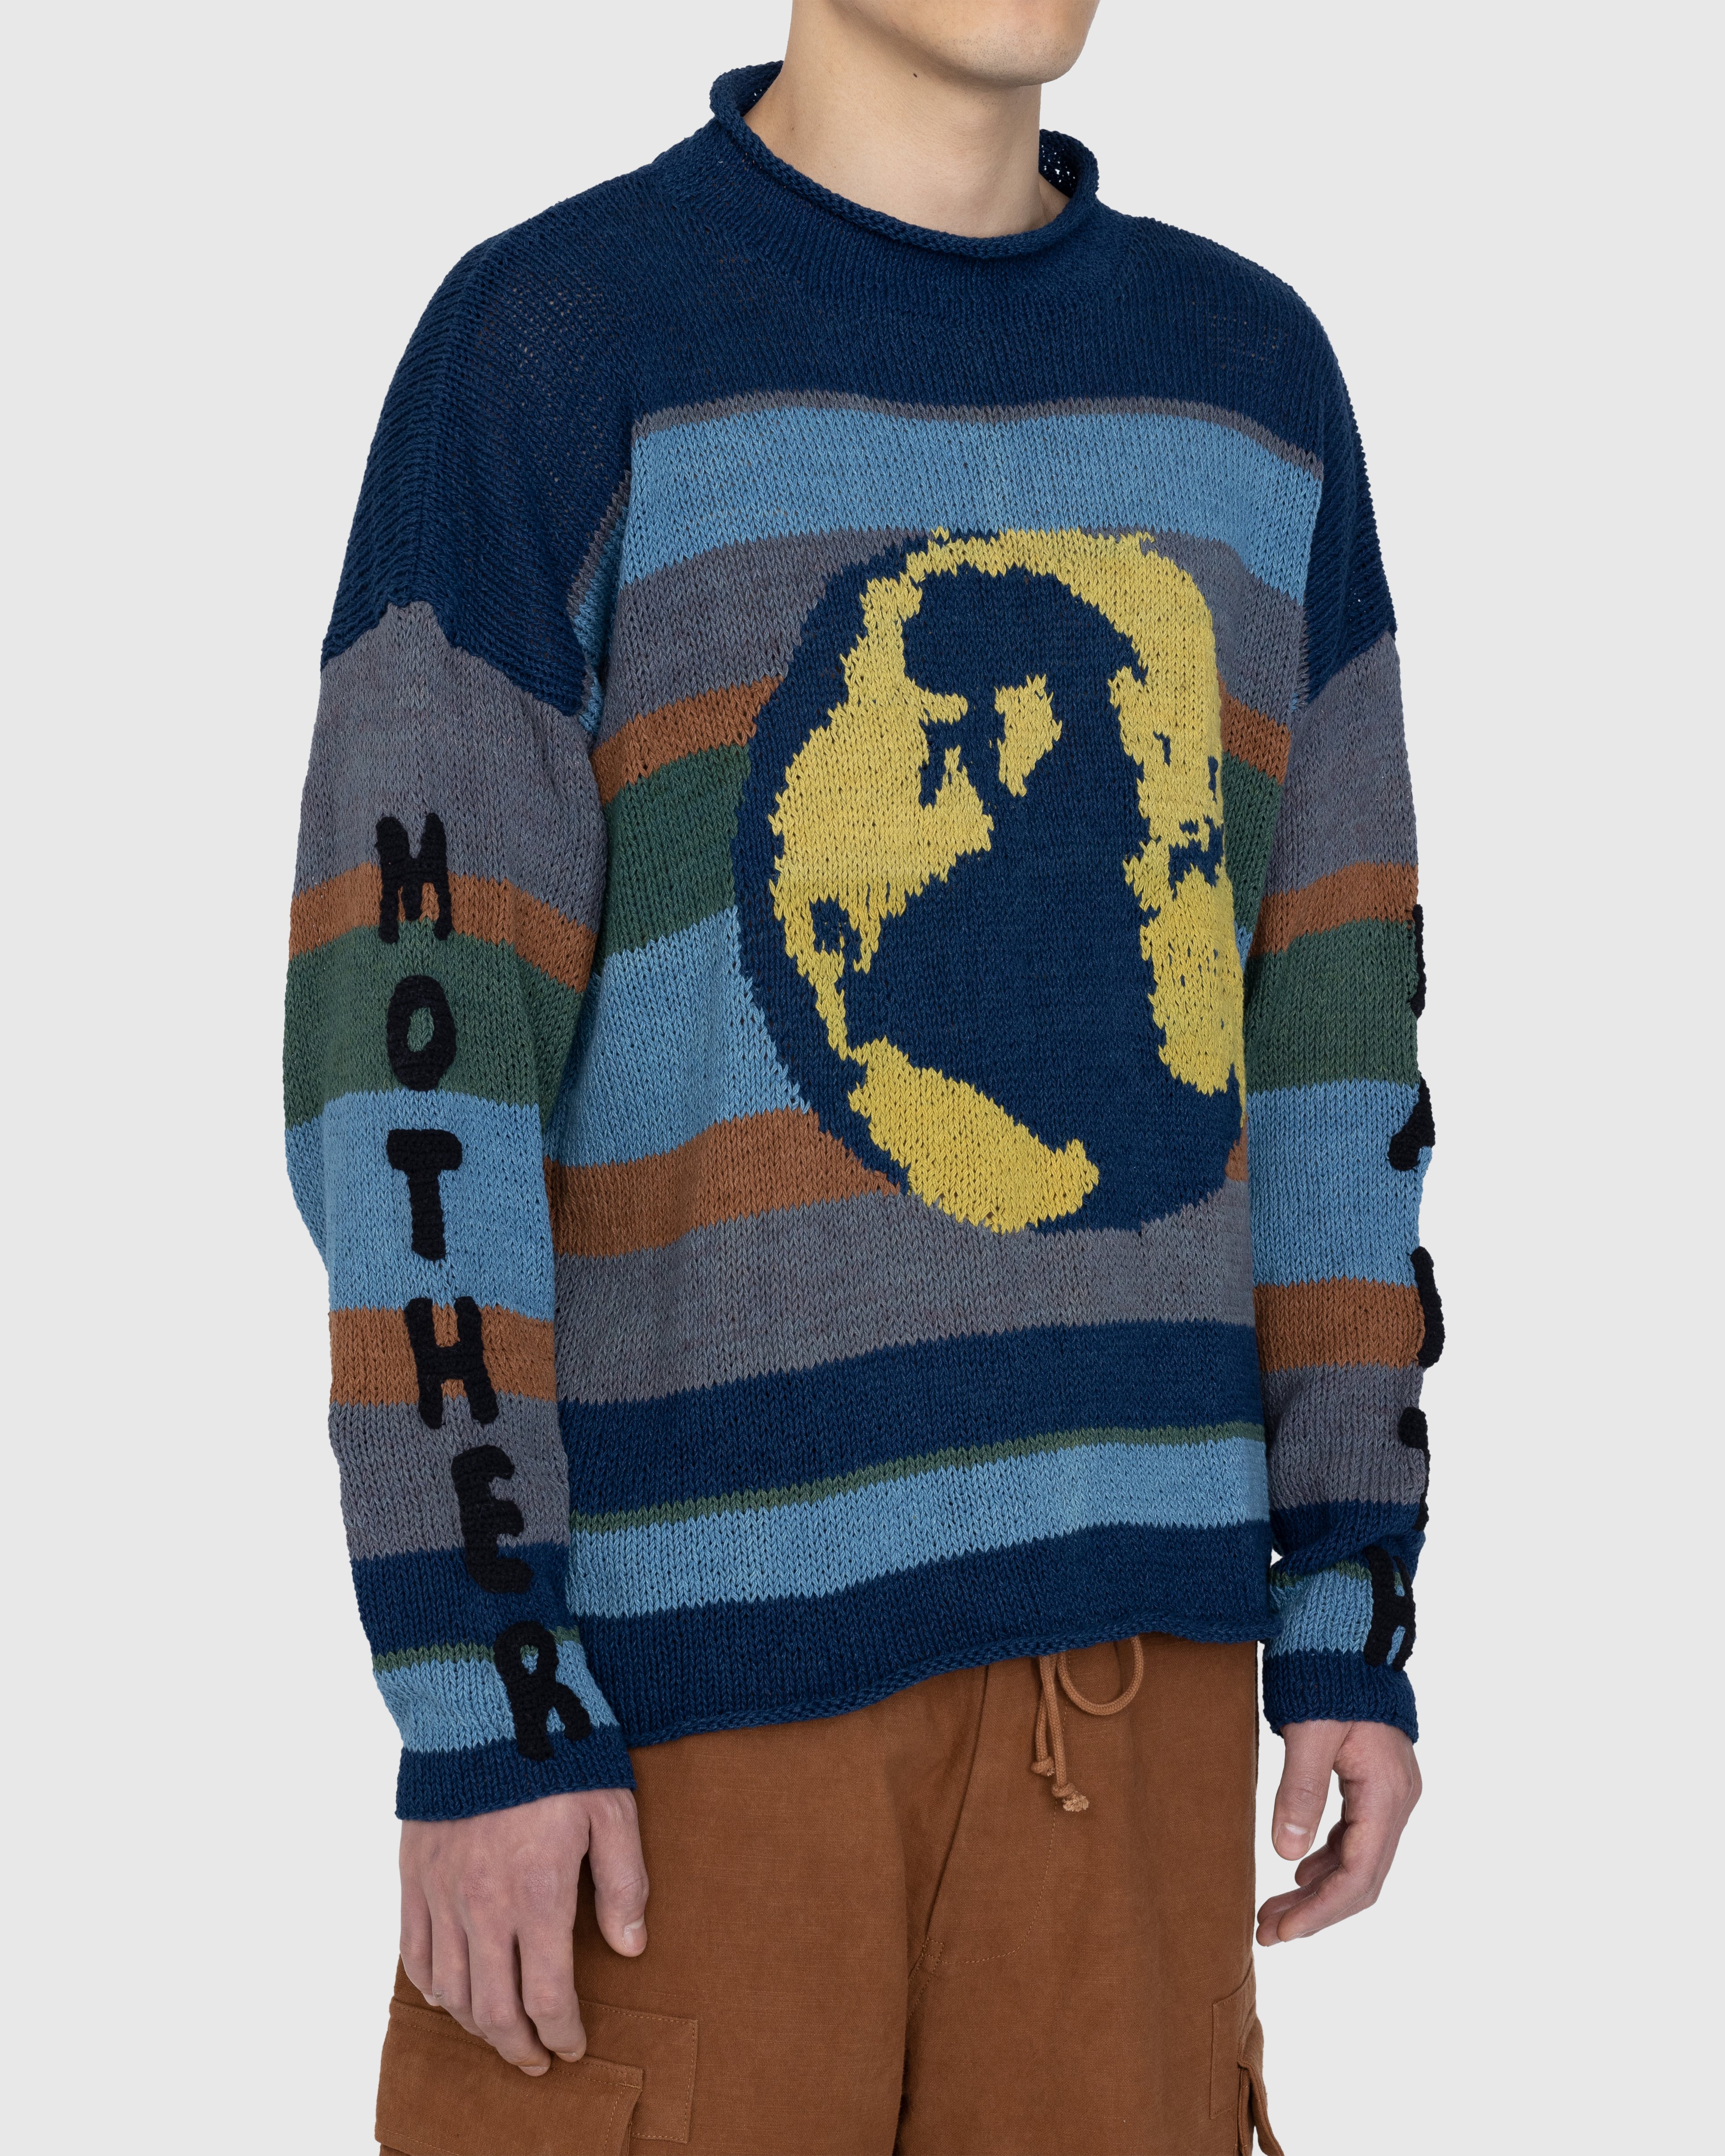 Story mfg. - Twinsun Rollneck Striped Mother Earth Multi - Clothing - Multi - Image 3